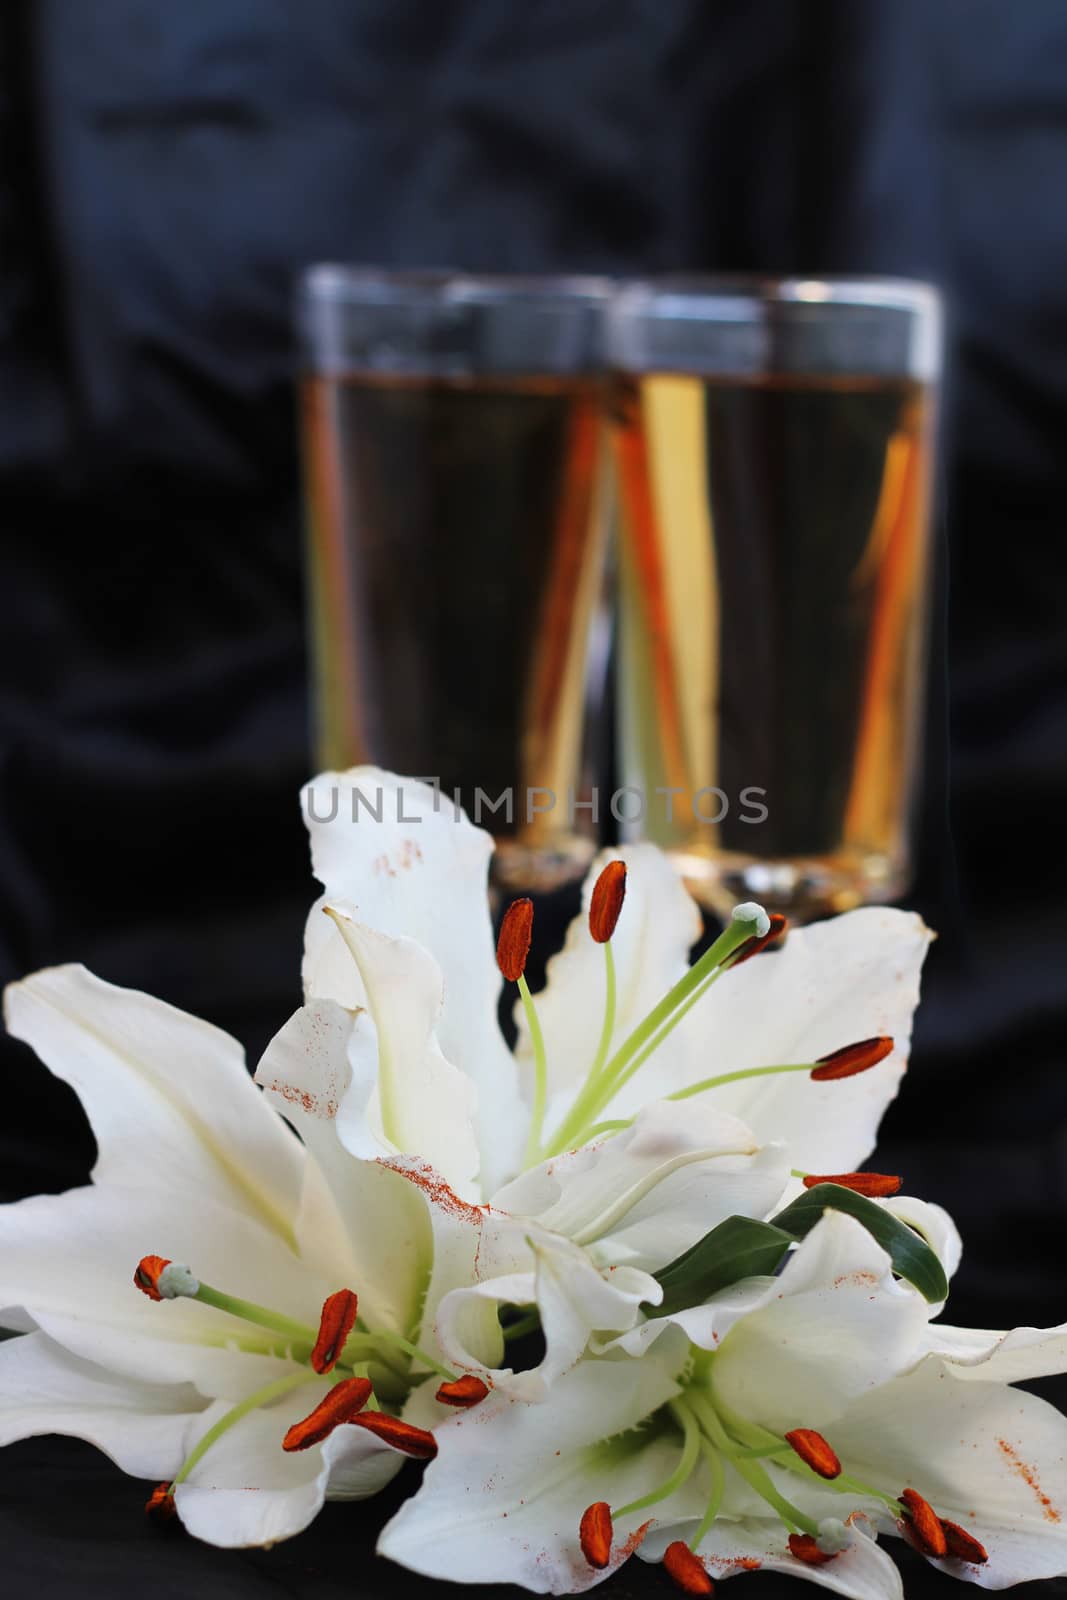 Glasses with wine and lily flower on black silk